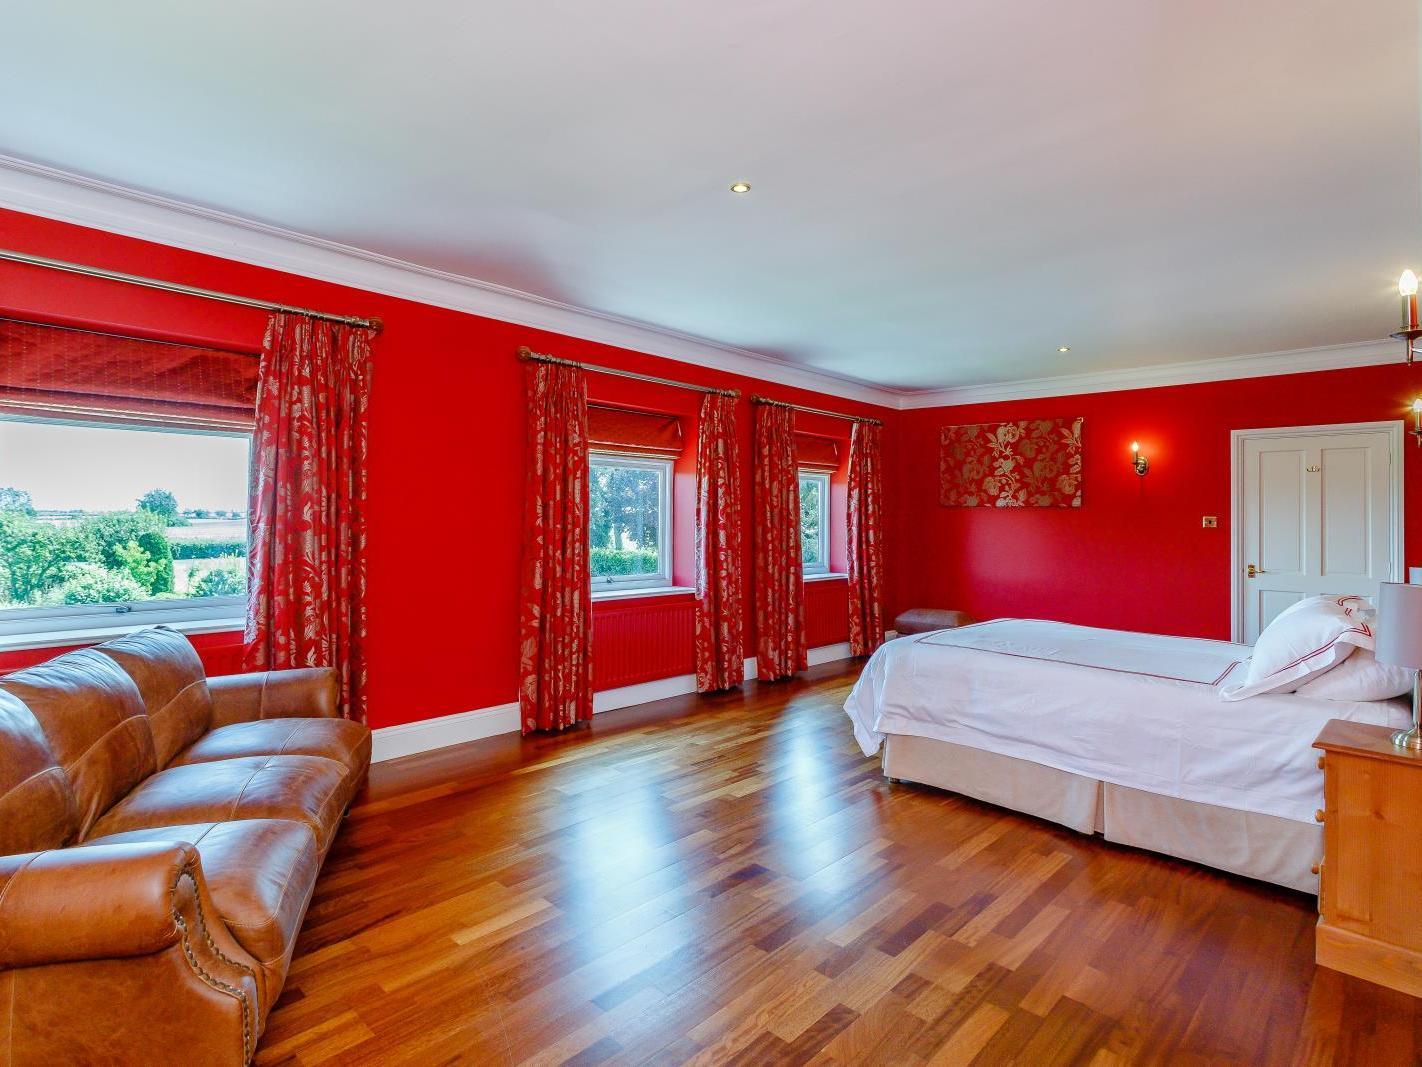 The master bedroom has an en-suite, a dressing room and a balcony. Photo: Fine and Country.